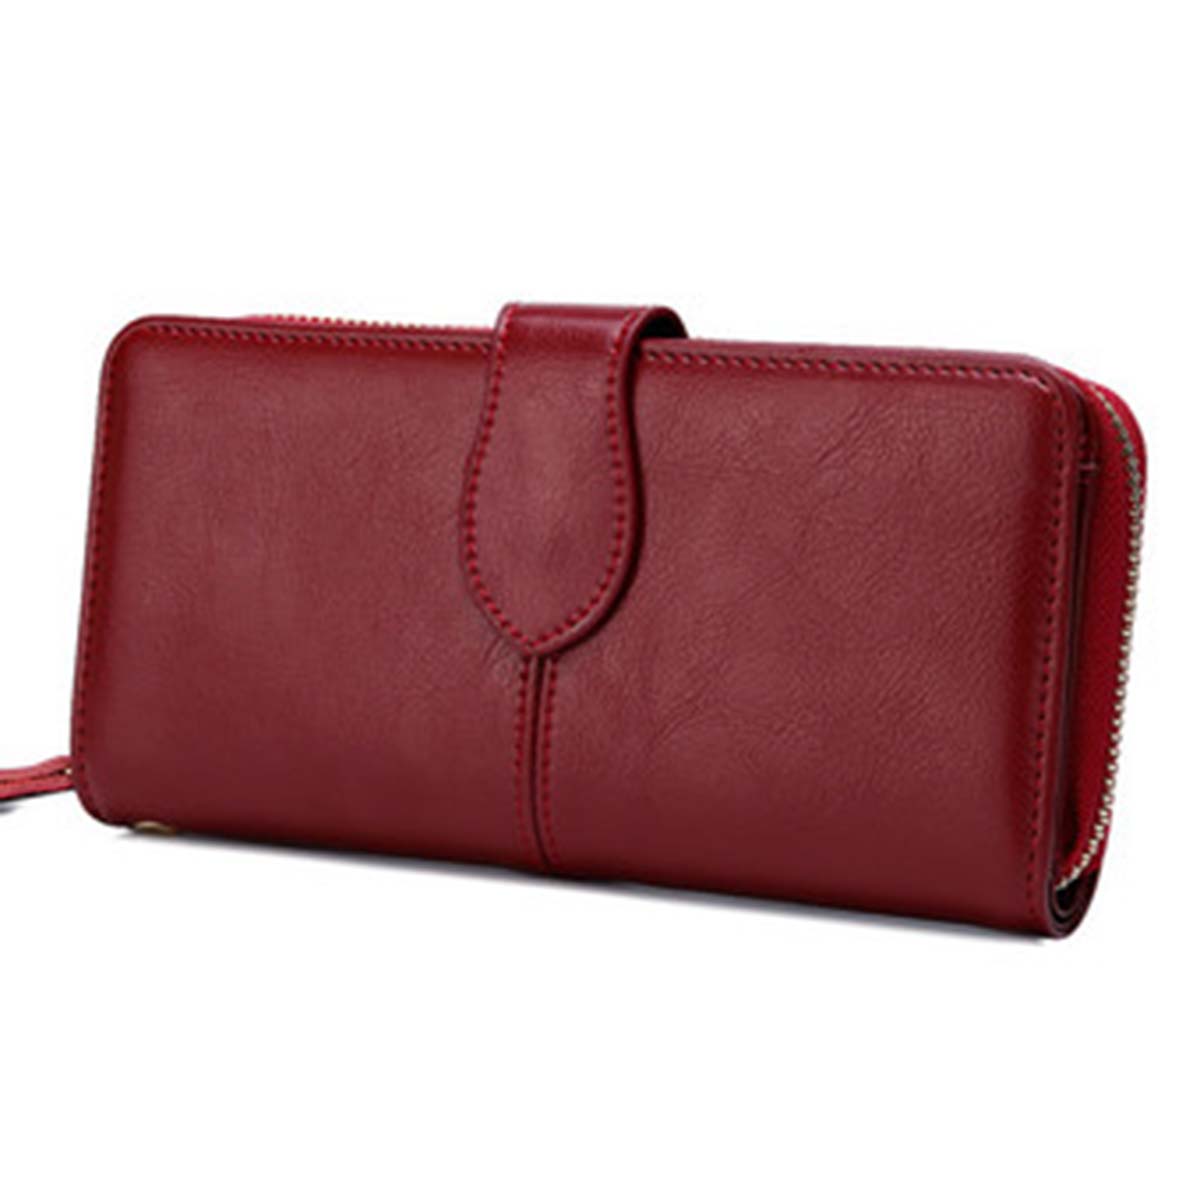 Women top grain genuine cow leather wallet real leather long model red intl 2866 5220706 3 product